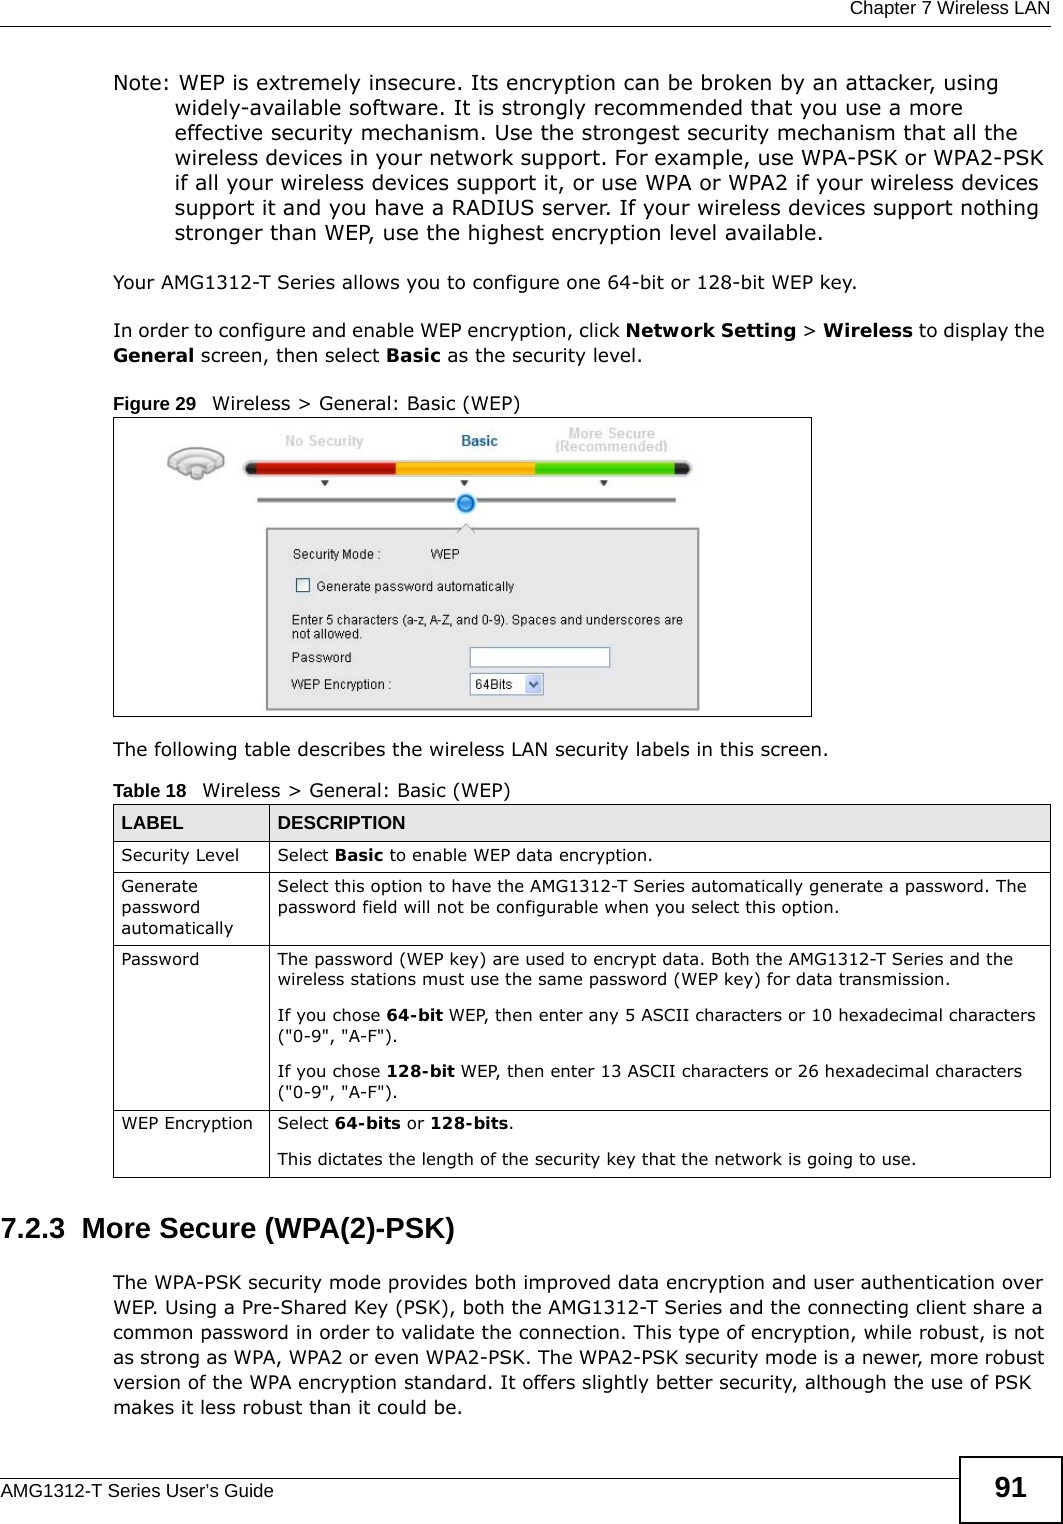  Chapter 7 Wireless LANAMG1312-T Series User’s Guide 91Note: WEP is extremely insecure. Its encryption can be broken by an attacker, using widely-available software. It is strongly recommended that you use a more effective security mechanism. Use the strongest security mechanism that all the wireless devices in your network support. For example, use WPA-PSK or WPA2-PSK if all your wireless devices support it, or use WPA or WPA2 if your wireless devices support it and you have a RADIUS server. If your wireless devices support nothing stronger than WEP, use the highest encryption level available.Your AMG1312-T Series allows you to configure one 64-bit or 128-bit WEP key.In order to configure and enable WEP encryption, click Network Setting &gt; Wireless to display the General screen, then select Basic as the security level.Figure 29   Wireless &gt; General: Basic (WEP) The following table describes the wireless LAN security labels in this screen.7.2.3  More Secure (WPA(2)-PSK)The WPA-PSK security mode provides both improved data encryption and user authentication over WEP. Using a Pre-Shared Key (PSK), both the AMG1312-T Series and the connecting client share a common password in order to validate the connection. This type of encryption, while robust, is not as strong as WPA, WPA2 or even WPA2-PSK. The WPA2-PSK security mode is a newer, more robust version of the WPA encryption standard. It offers slightly better security, although the use of PSK makes it less robust than it could be. Table 18   Wireless &gt; General: Basic (WEP)LABEL DESCRIPTIONSecurity Level Select Basic to enable WEP data encryption.Generate password automatically Select this option to have the AMG1312-T Series automatically generate a password. The password field will not be configurable when you select this option.Password The password (WEP key) are used to encrypt data. Both the AMG1312-T Series and the wireless stations must use the same password (WEP key) for data transmission.If you chose 64-bit WEP, then enter any 5 ASCII characters or 10 hexadecimal characters (&quot;0-9&quot;, &quot;A-F&quot;).If you chose 128-bit WEP, then enter 13 ASCII characters or 26 hexadecimal characters (&quot;0-9&quot;, &quot;A-F&quot;). WEP Encryption Select 64-bits or 128-bits.This dictates the length of the security key that the network is going to use.